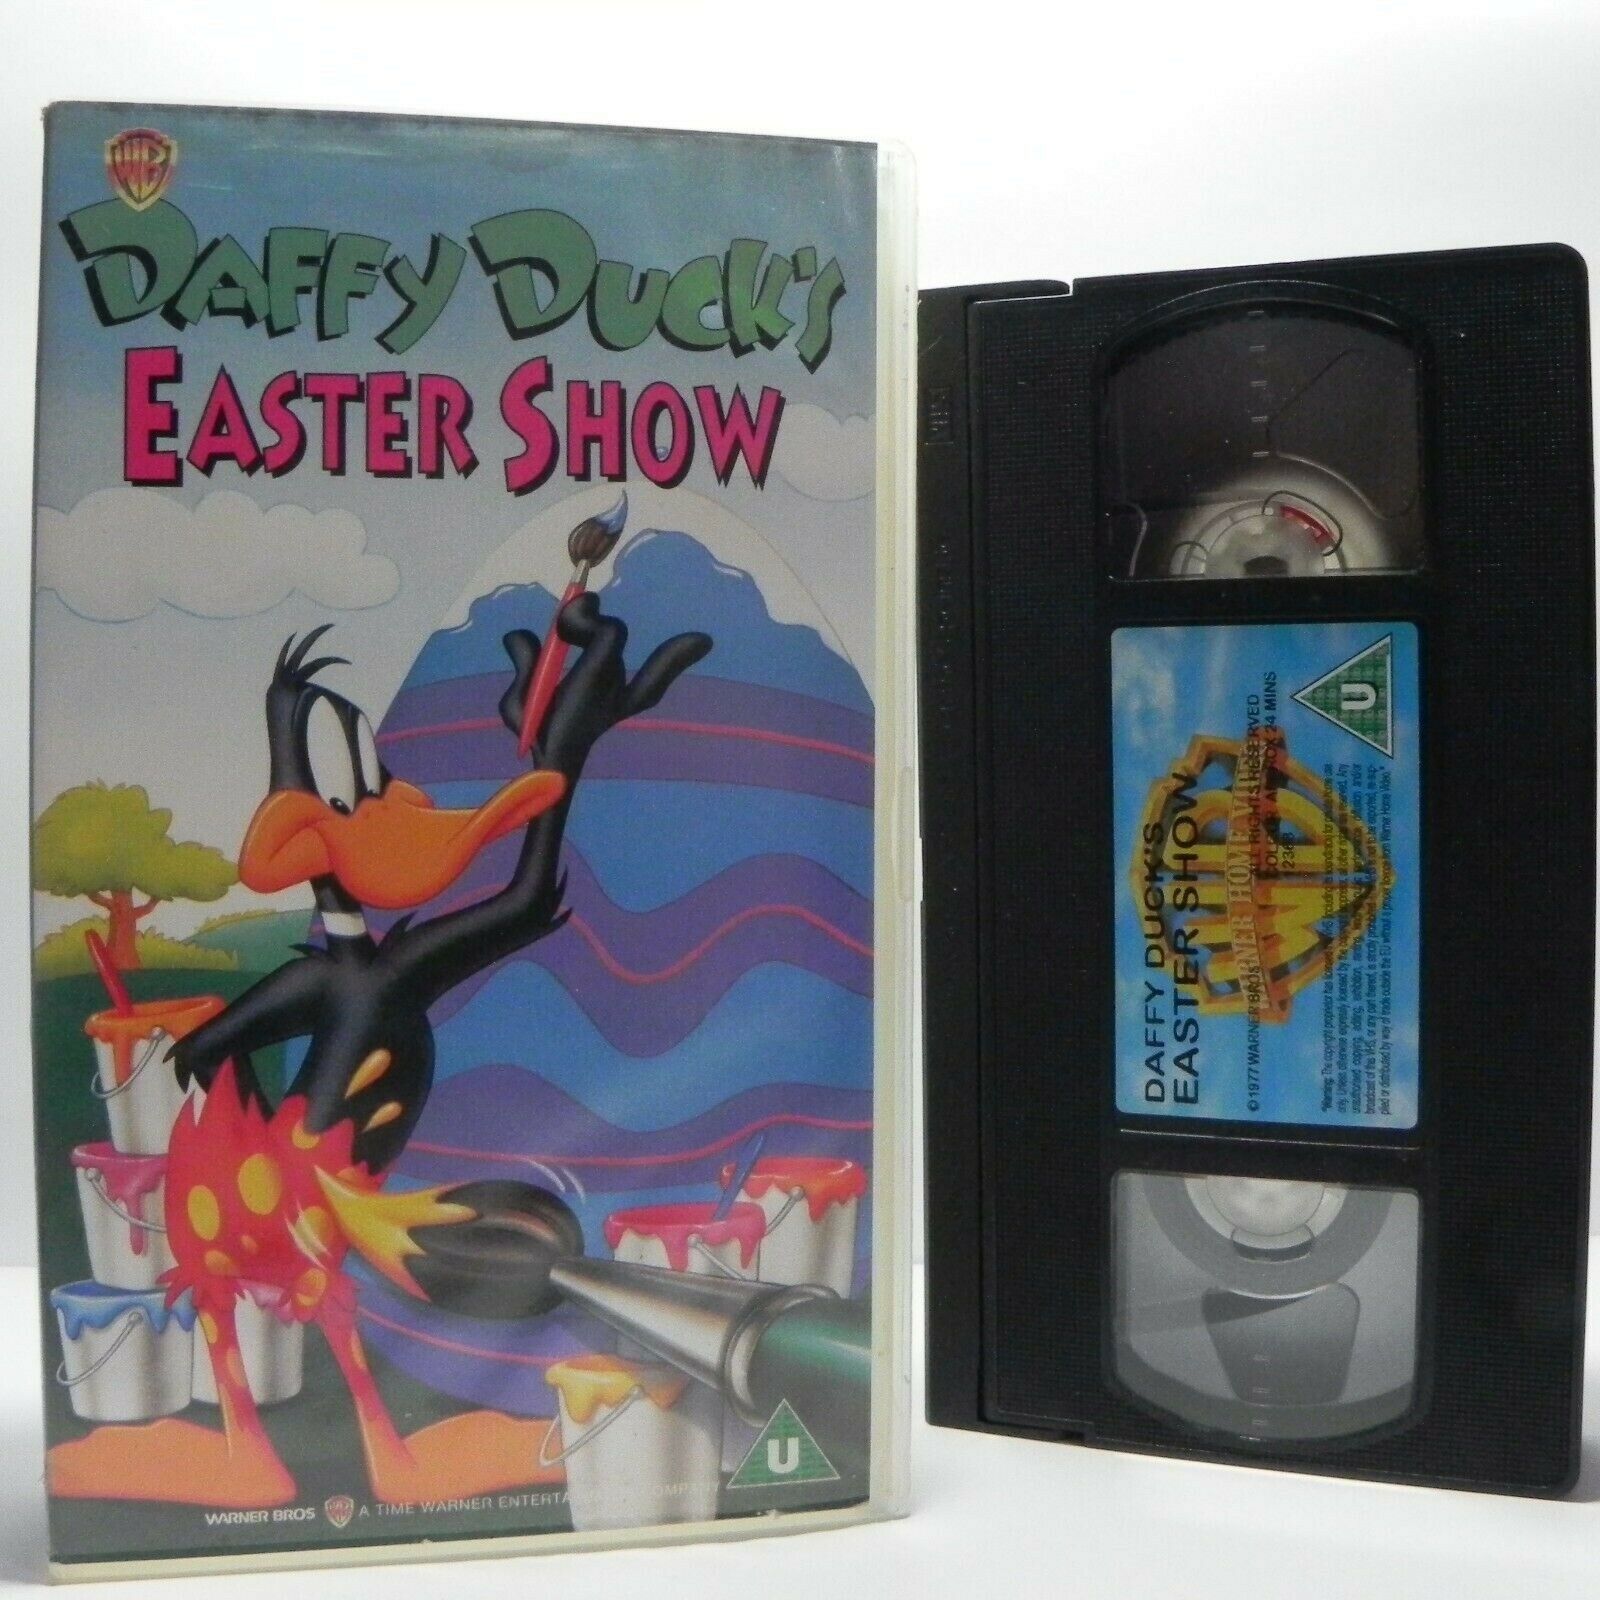 Daffy Duck: Easter Show - Animated - Cartoon Fun - Adventures - Kids - Pal VHS-